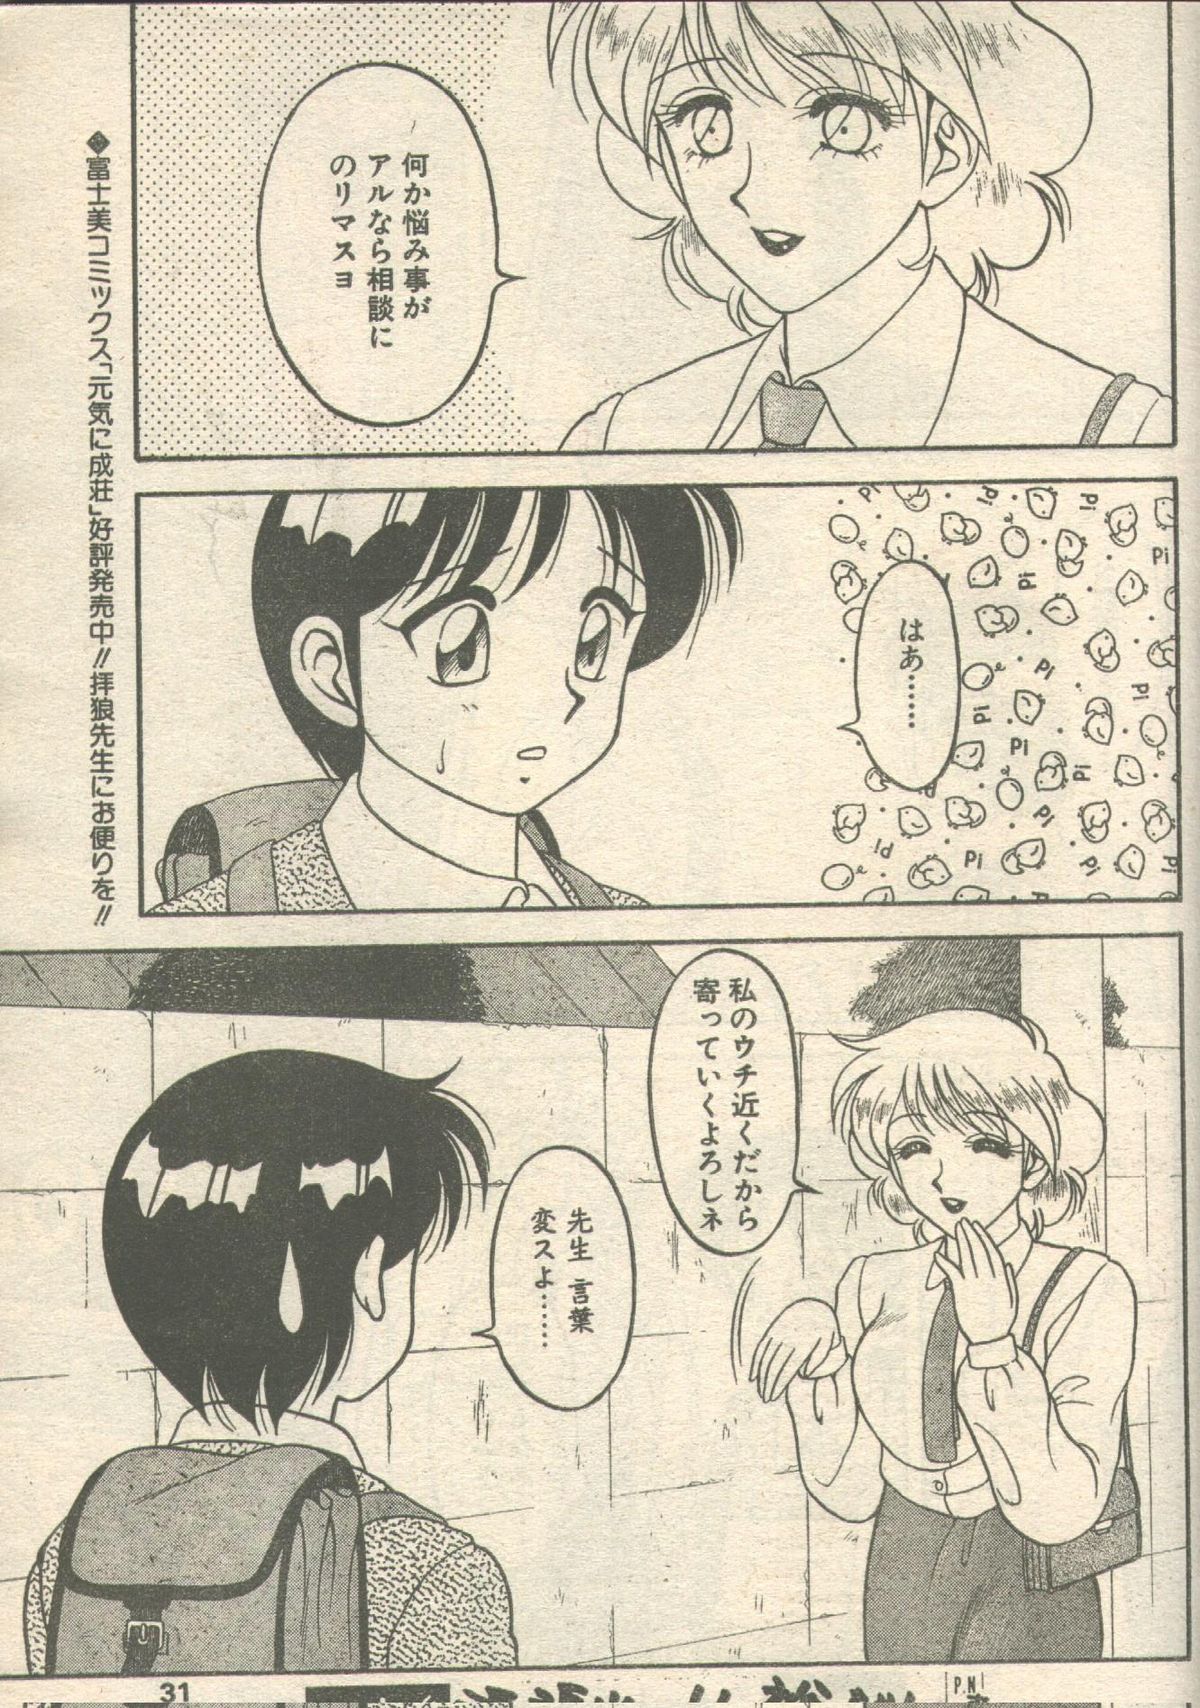 Candy Time 1992-11 [Incomplete] キャンディータイム 1992年11月号 [不完全]